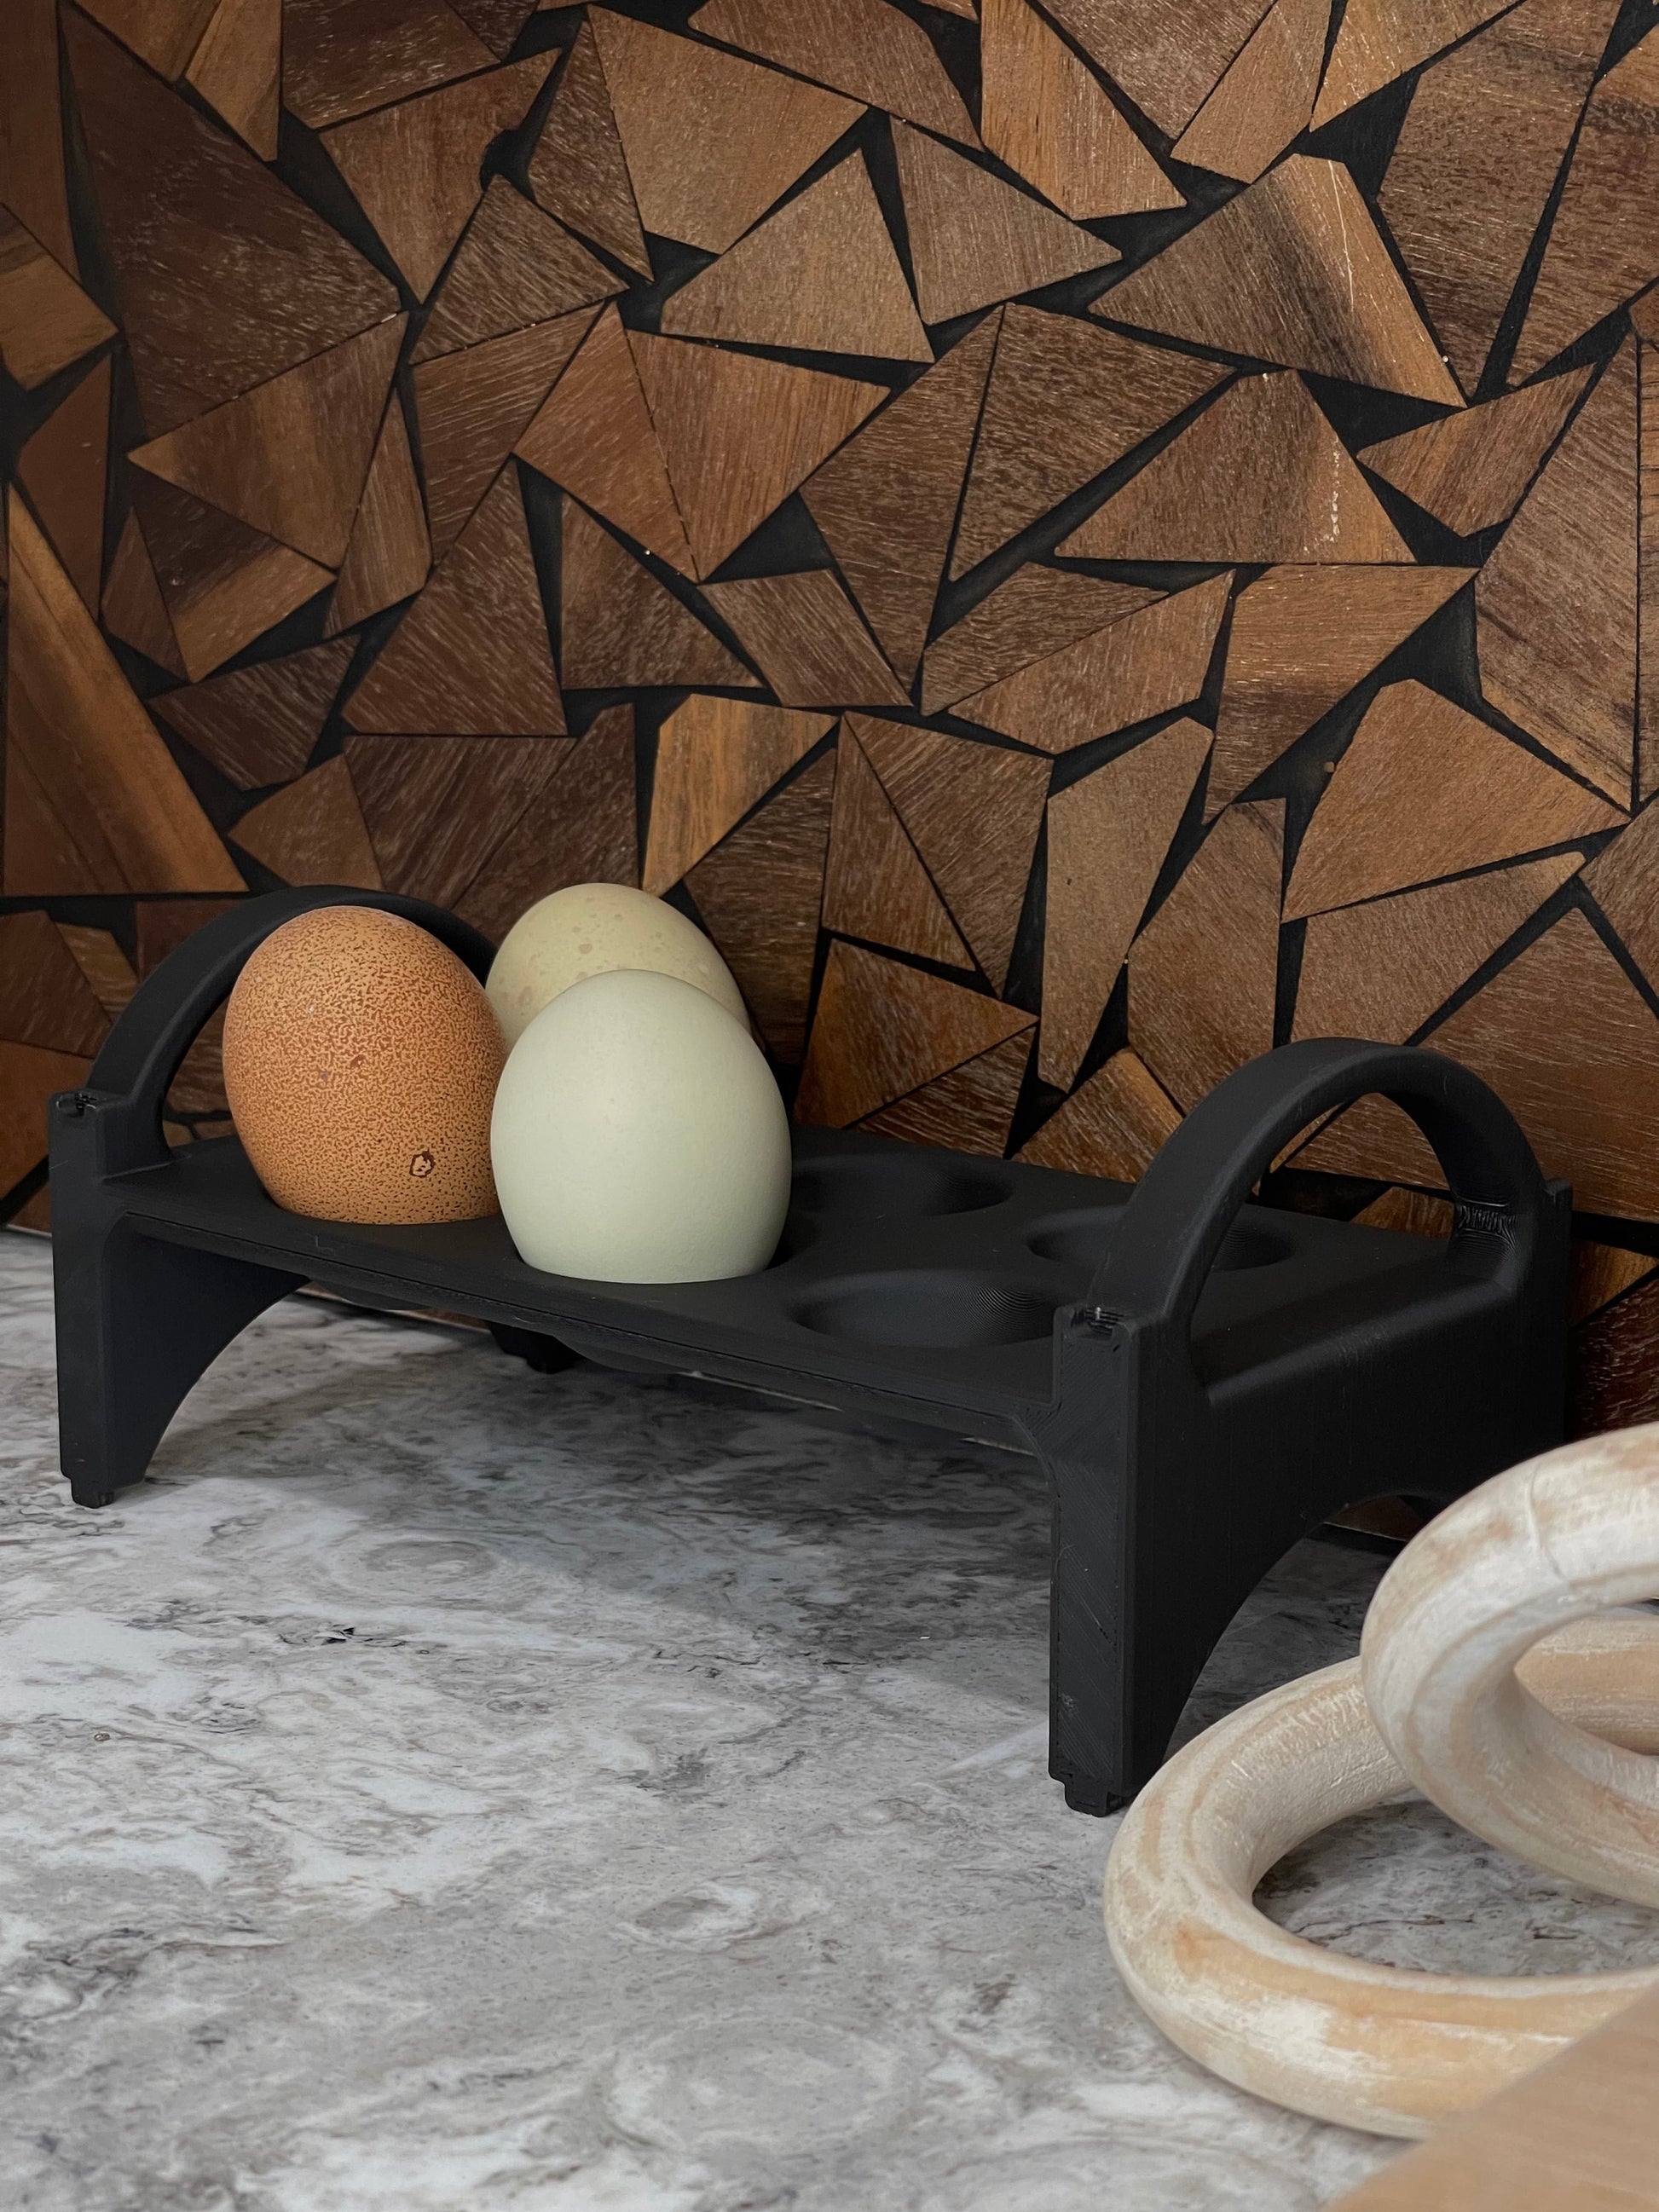 Gui's Chicken Coop Egg Holder - Countertop Stackable Egg Rack For Fresh  Eggs - Rustic Kitchen Decor (Top Rack) for Sale in Las Vegas, NV - OfferUp